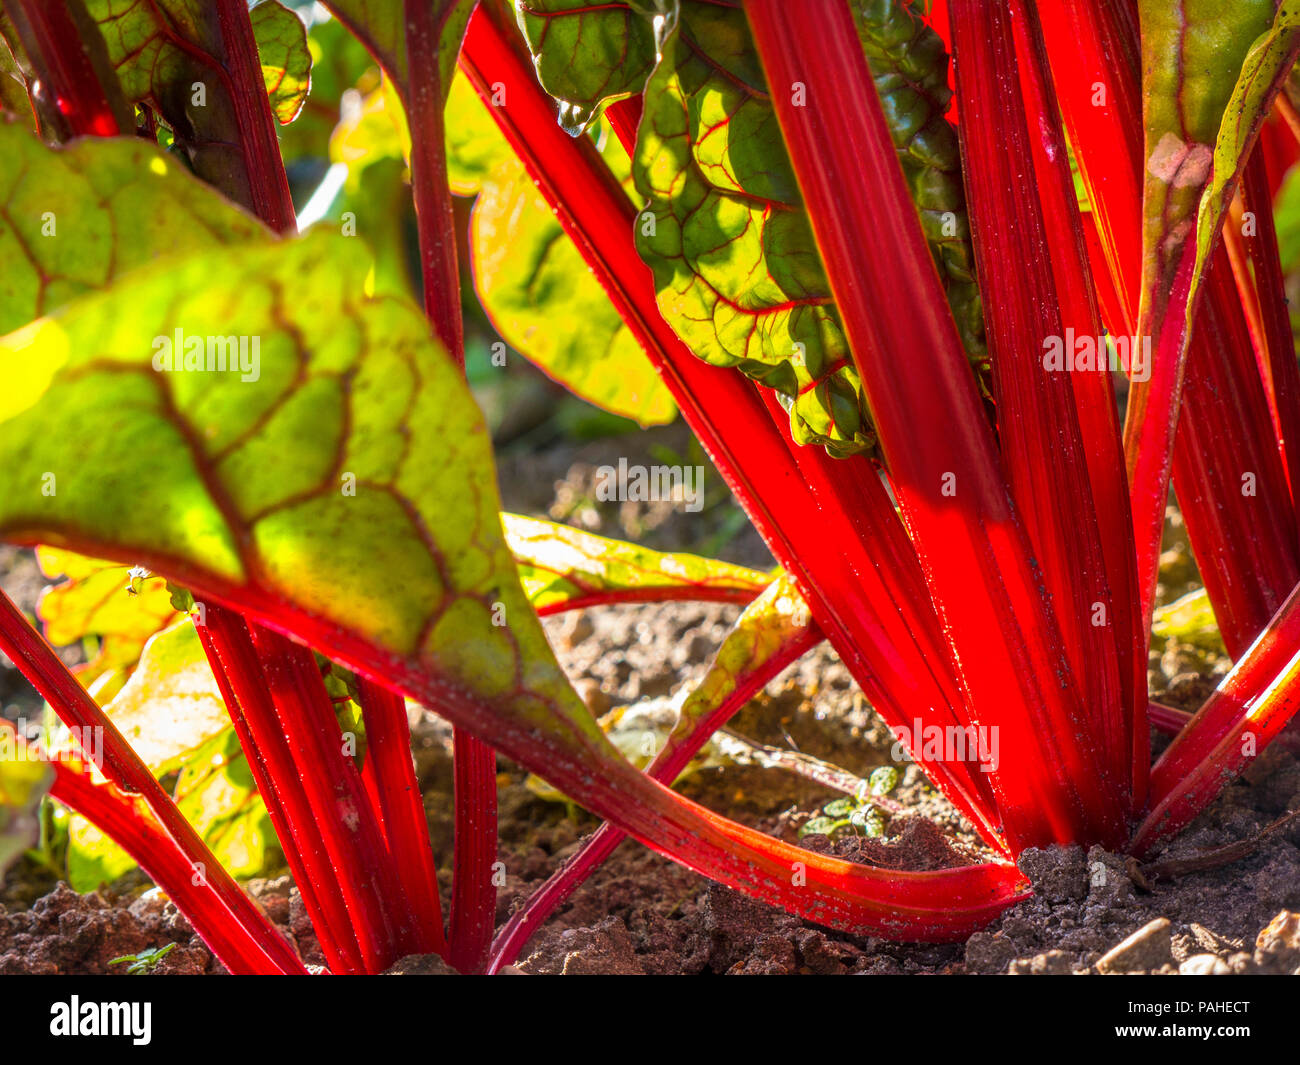 RHUBARB GROWING SOIL EARTH MOIST FREE DRAINING Close ground level view on Rhubarb stems growing in sunny vegetable produce garden Herbaceous Perennial Polygonaceae family Stock Photo